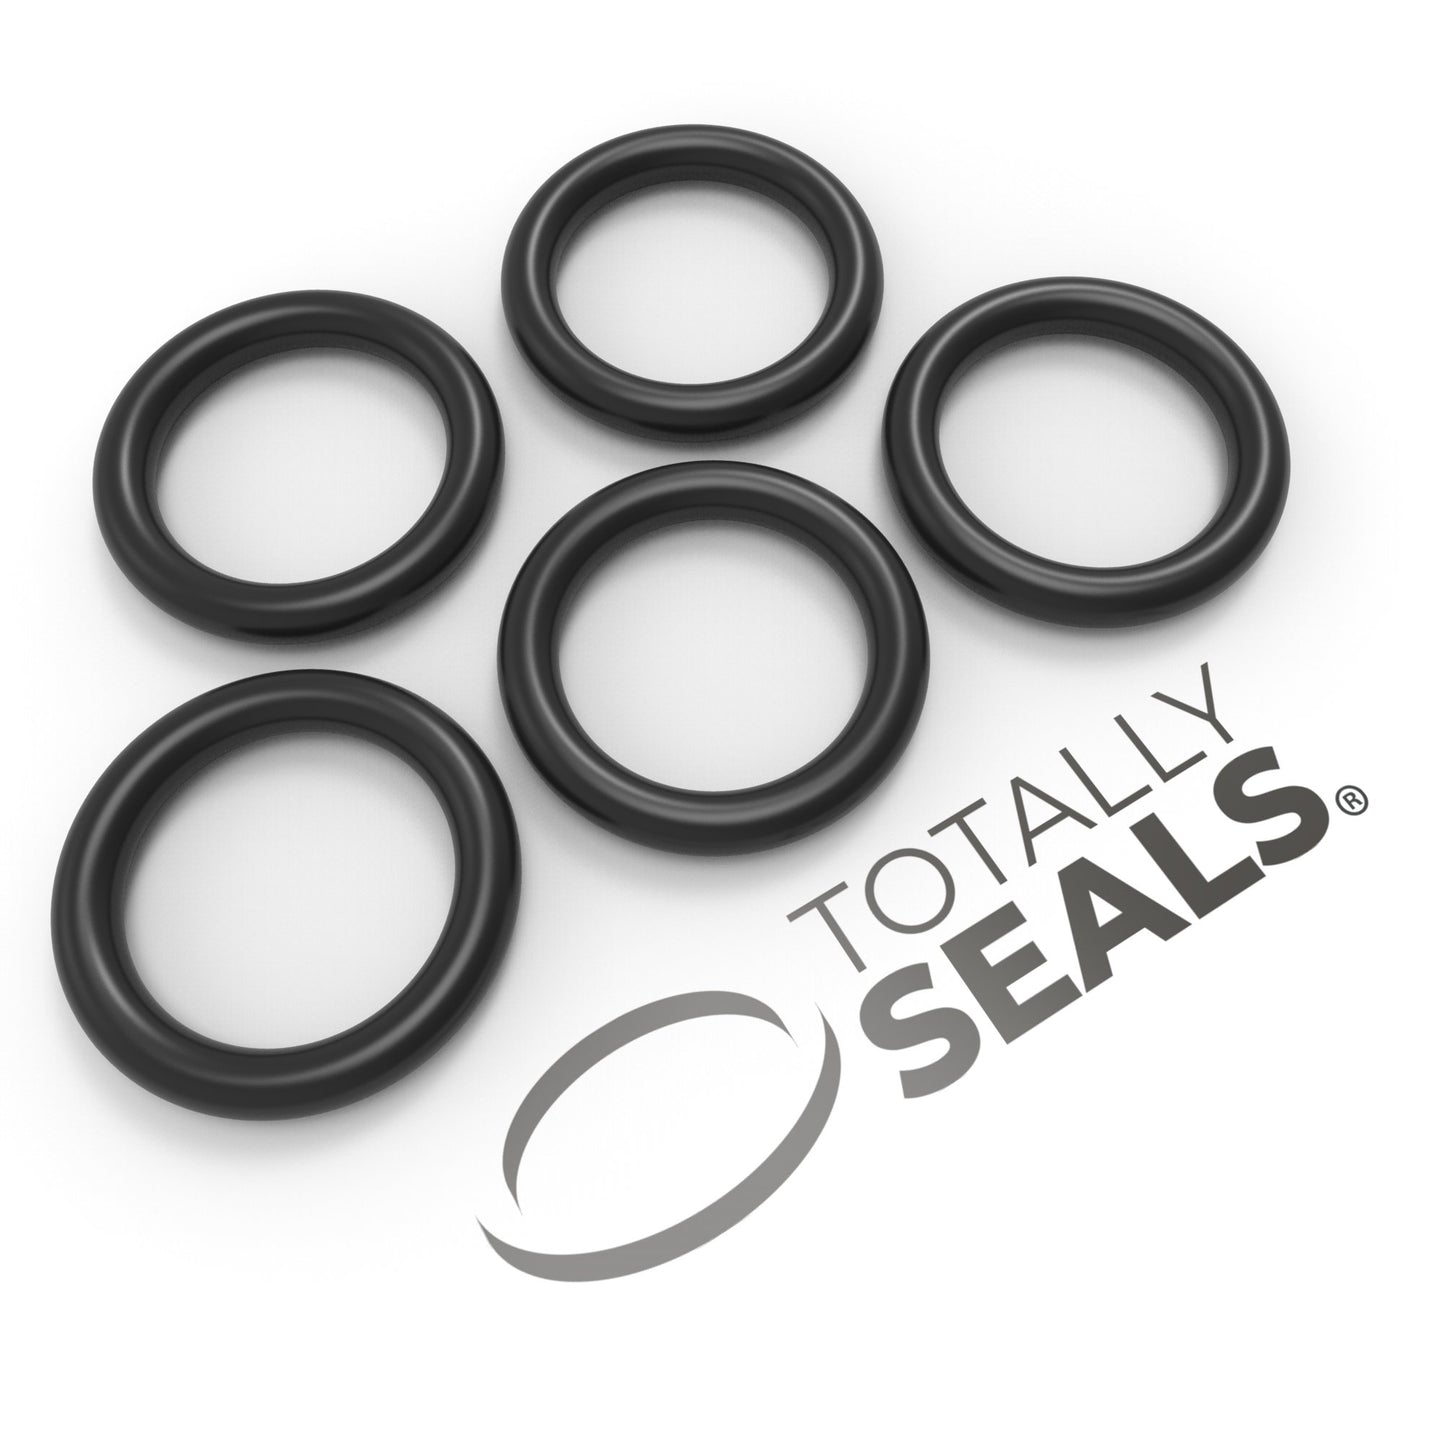 13/16" x 3/32" (BS117) Imperial Nitrile O-Rings - Totally Seals®